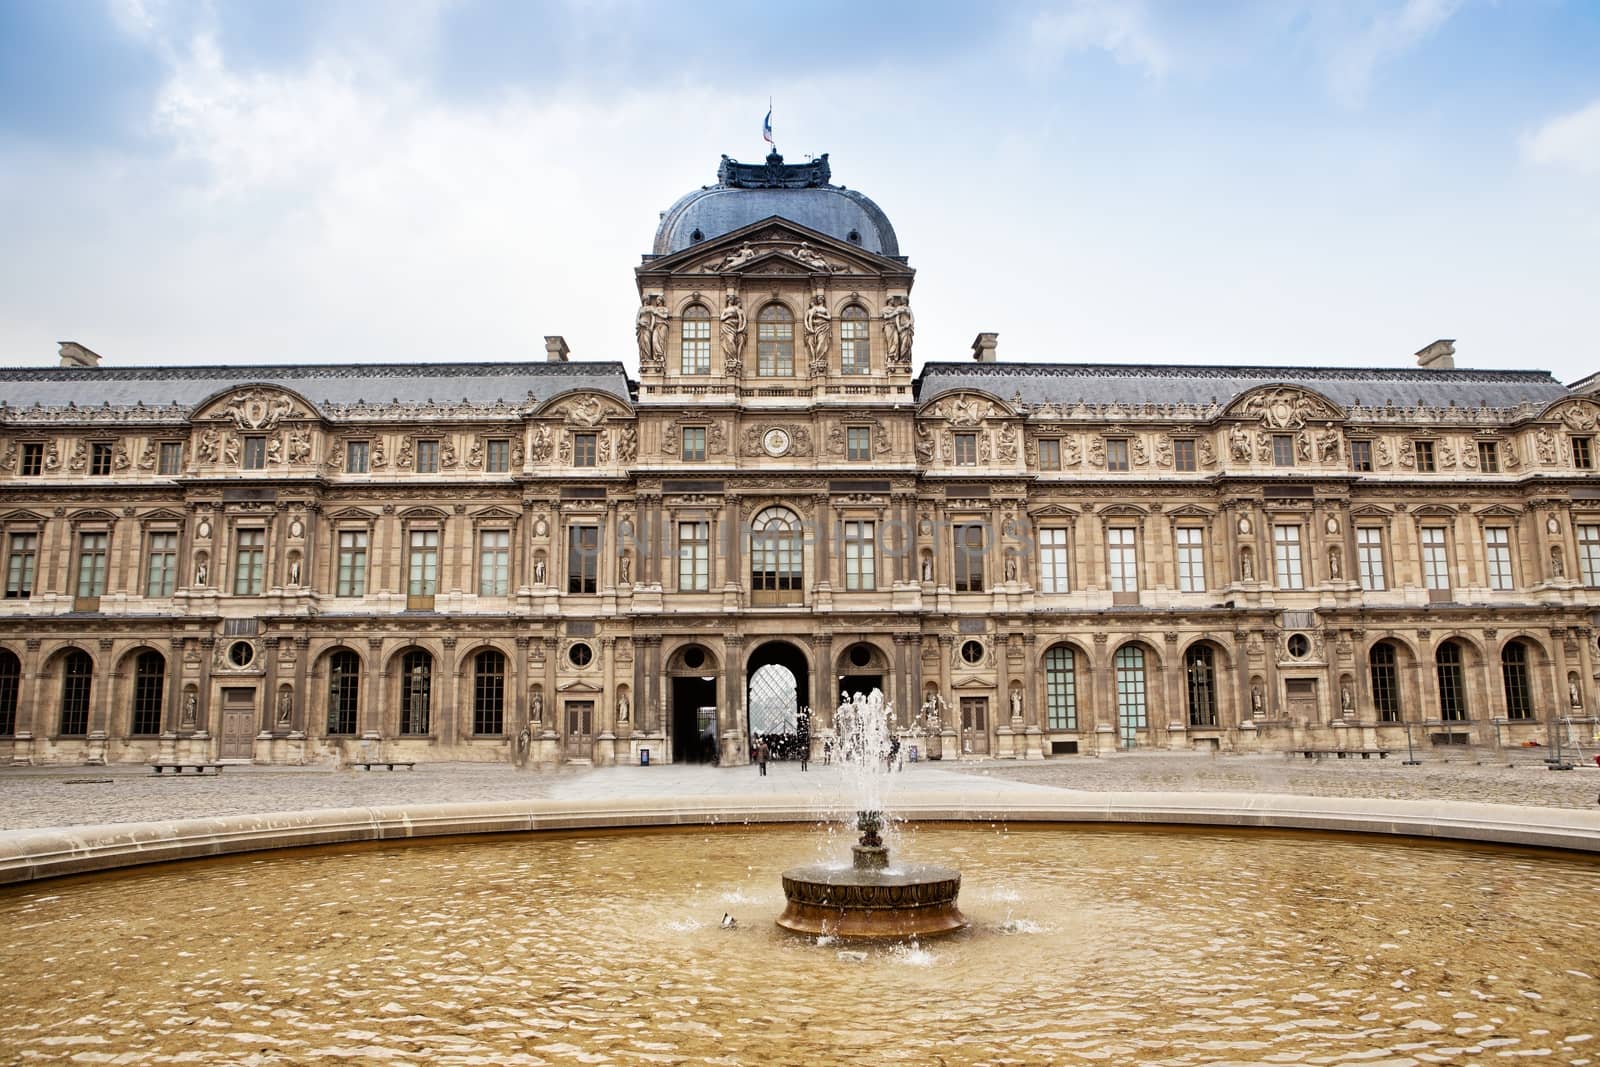 External view of the Louvre Museum (Musee du Louvre) in Paris, France by mitakag